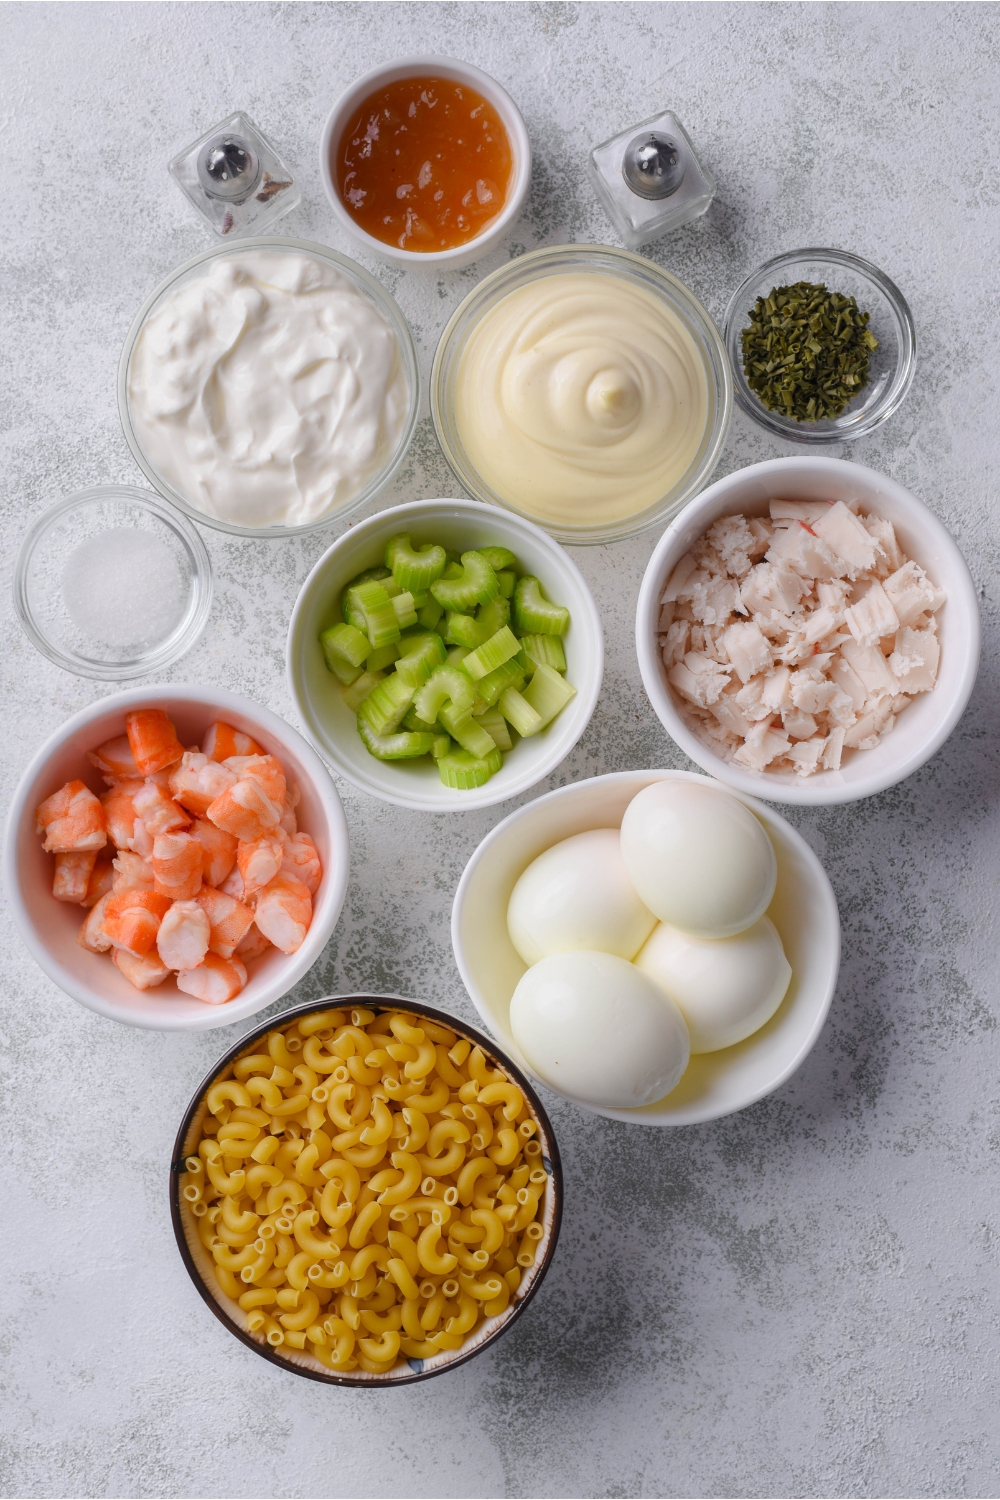 An assortment of ingredients including bowls of dried pasta, hard-boiled eggs, shrimp pieces, shredded crab meat, mayonnaise, diced celery, sour cream, herbs, and spices.